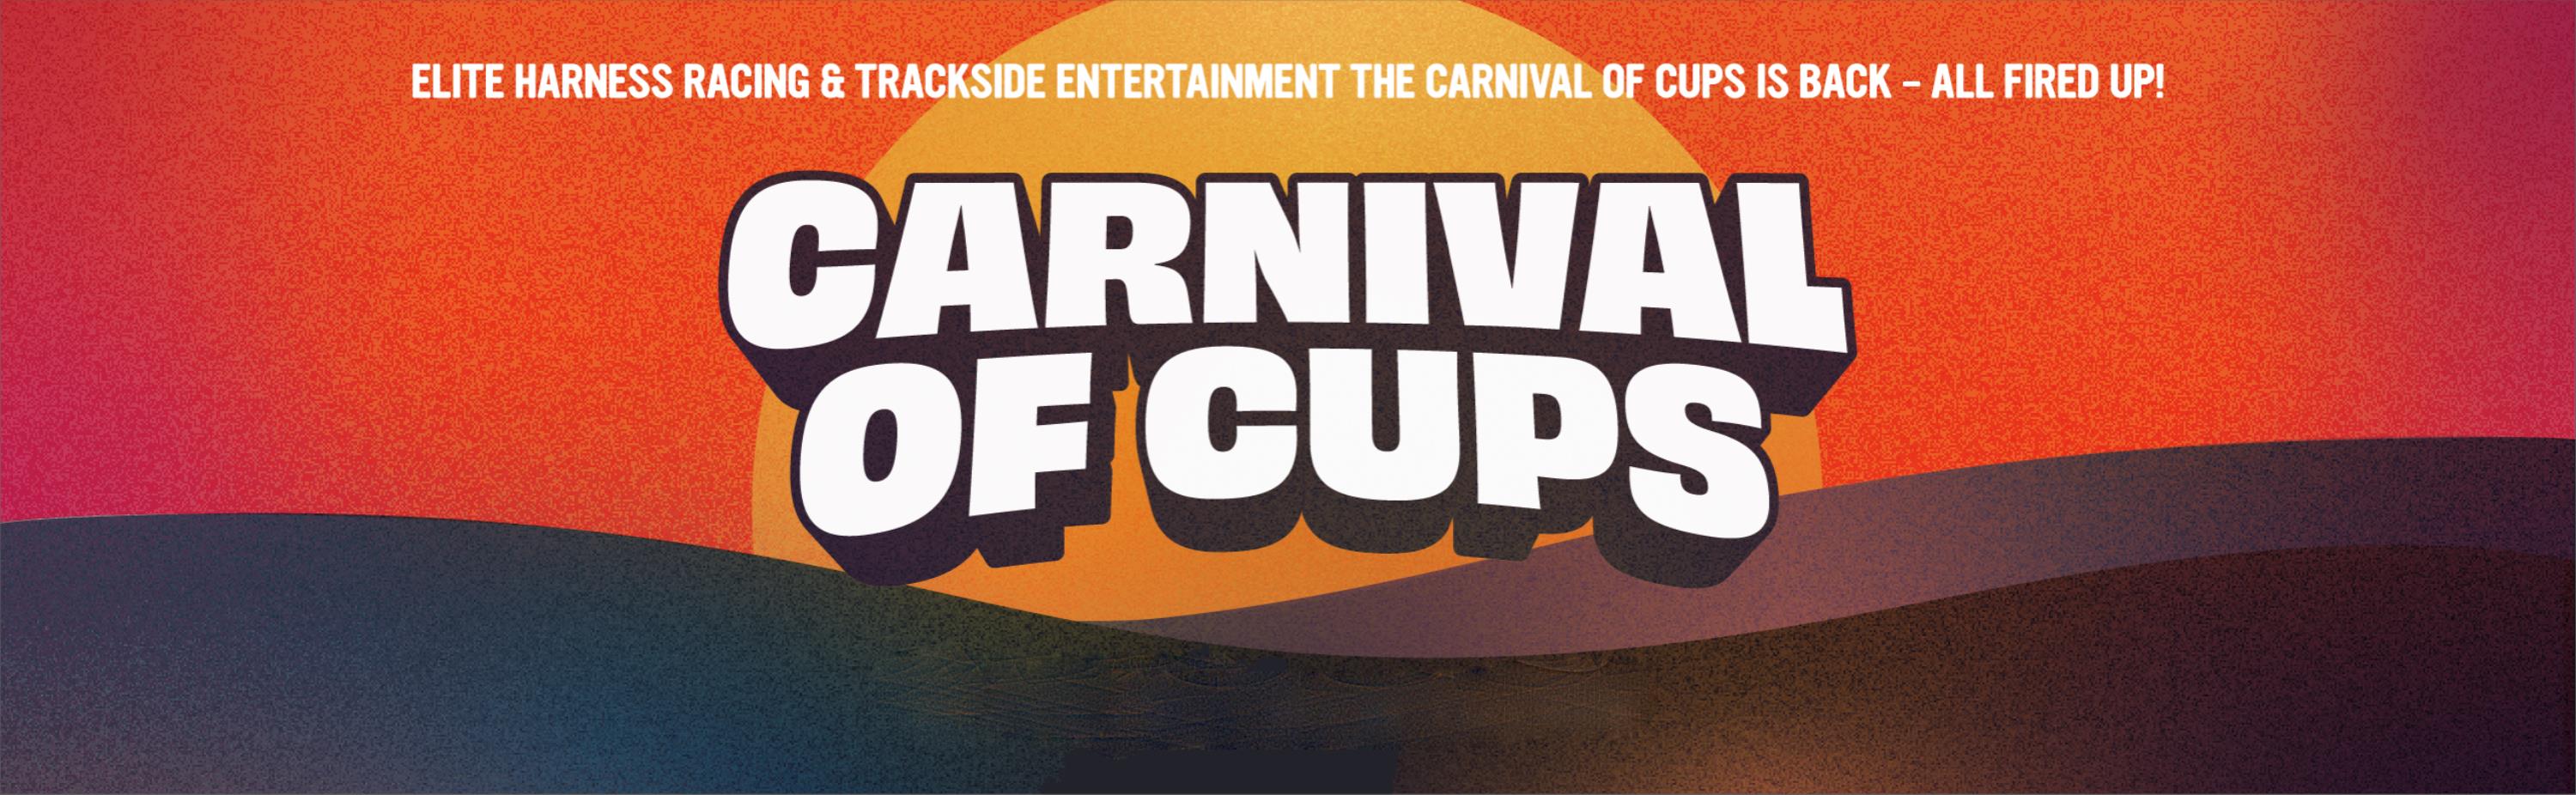 Carnival of Cups banner